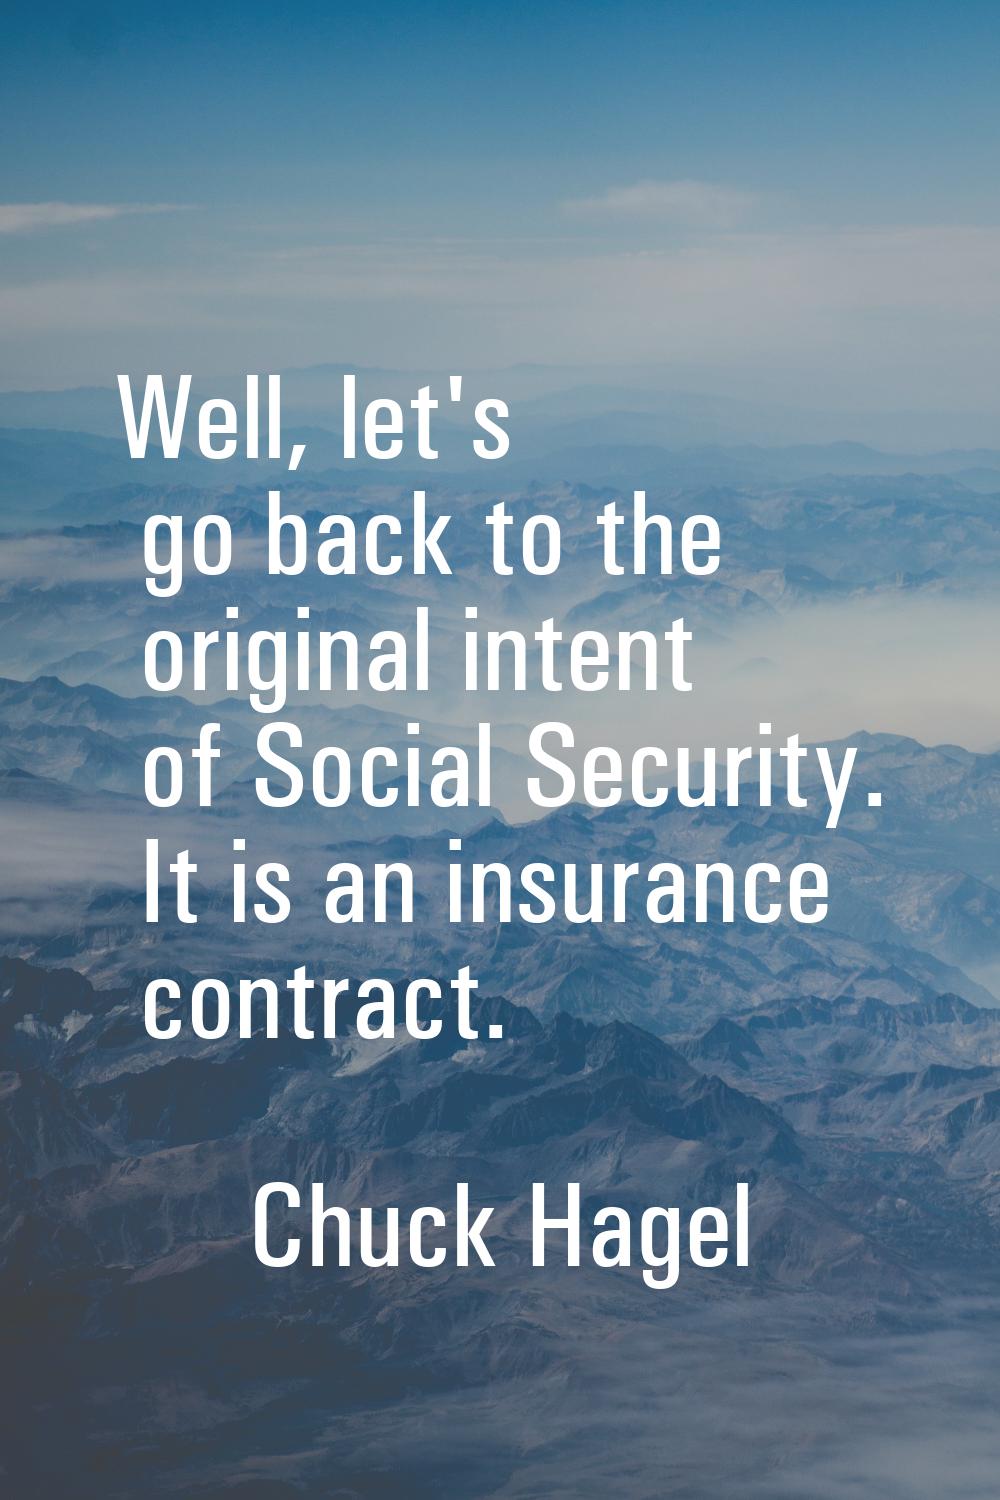 Well, let's go back to the original intent of Social Security. It is an insurance contract.